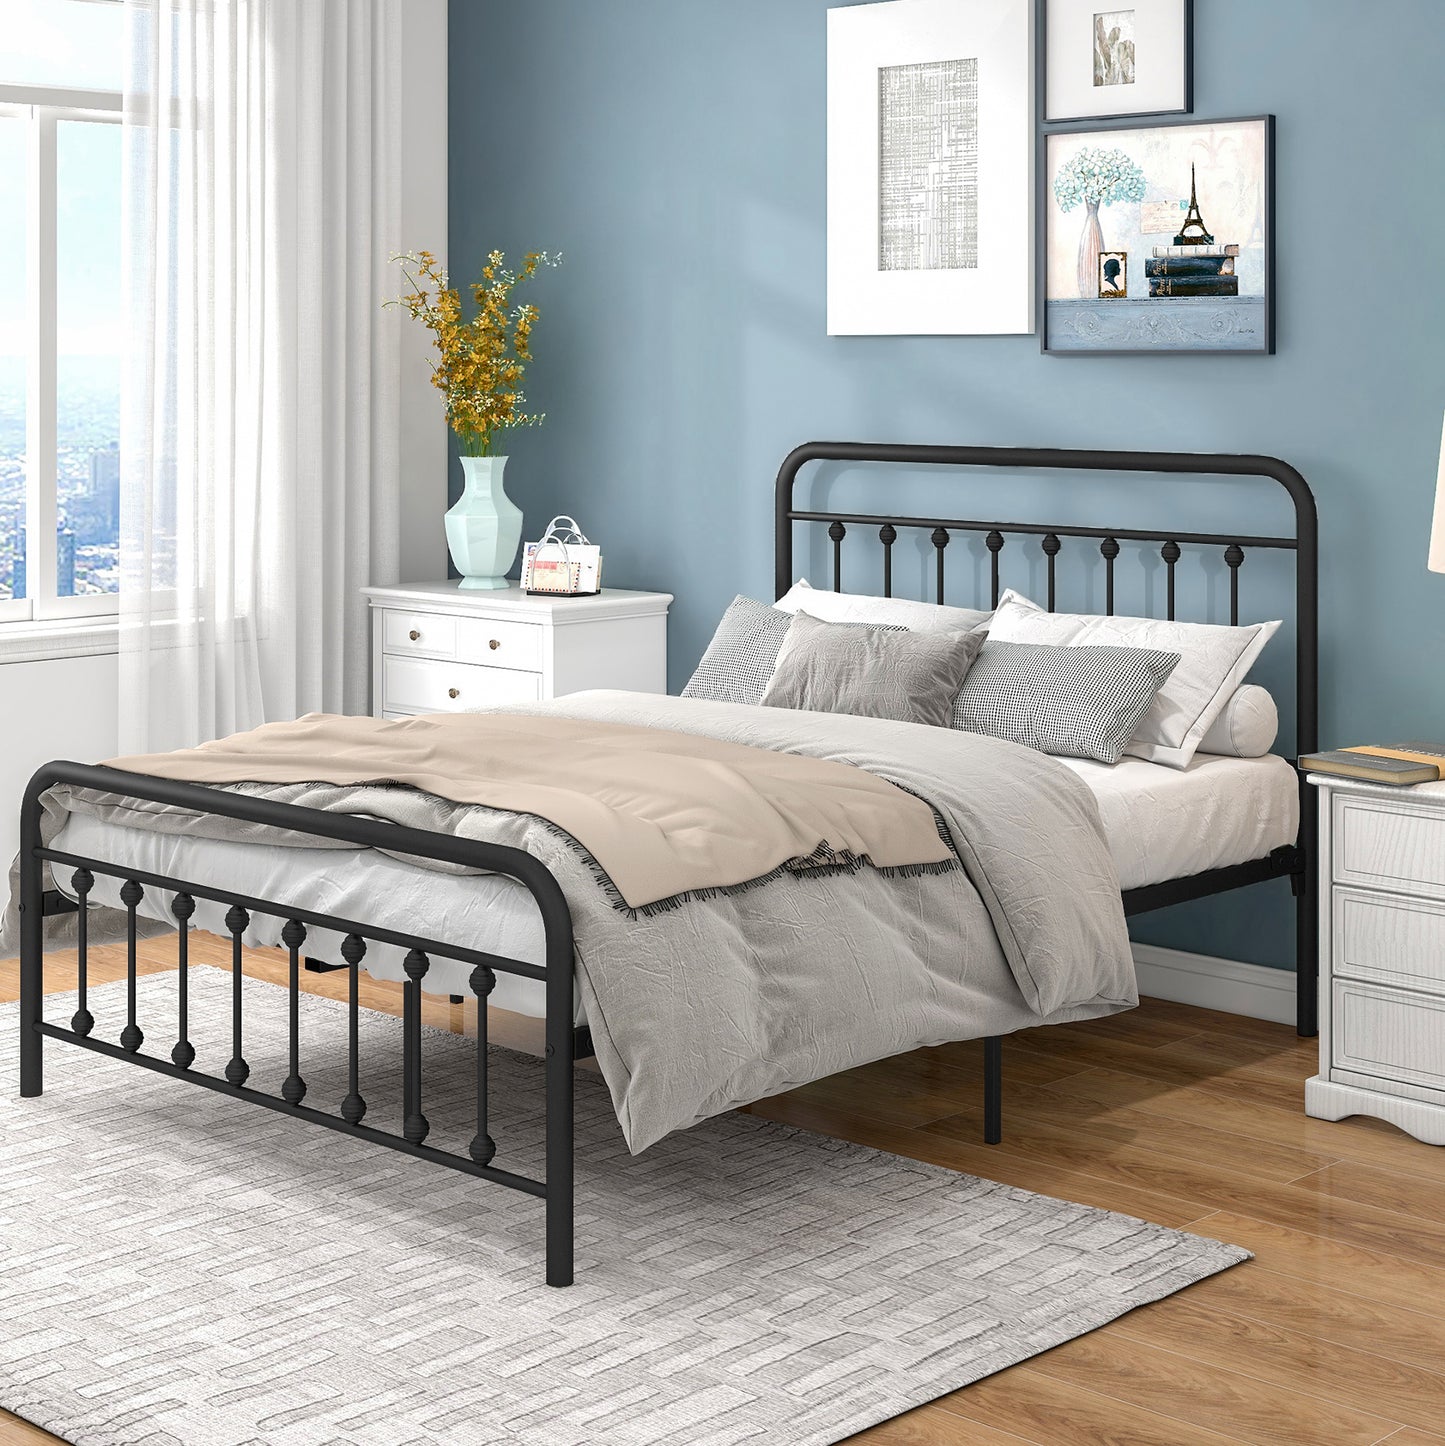 SYNGAR Black Full Bed Frame for Kids Teens Adults, Vintage Style Metal Platform Bed Frame with Headboard and Footboard, Heavy Duty Full Size Bed Frame Bedroom Furniture, No Box Spring Needed